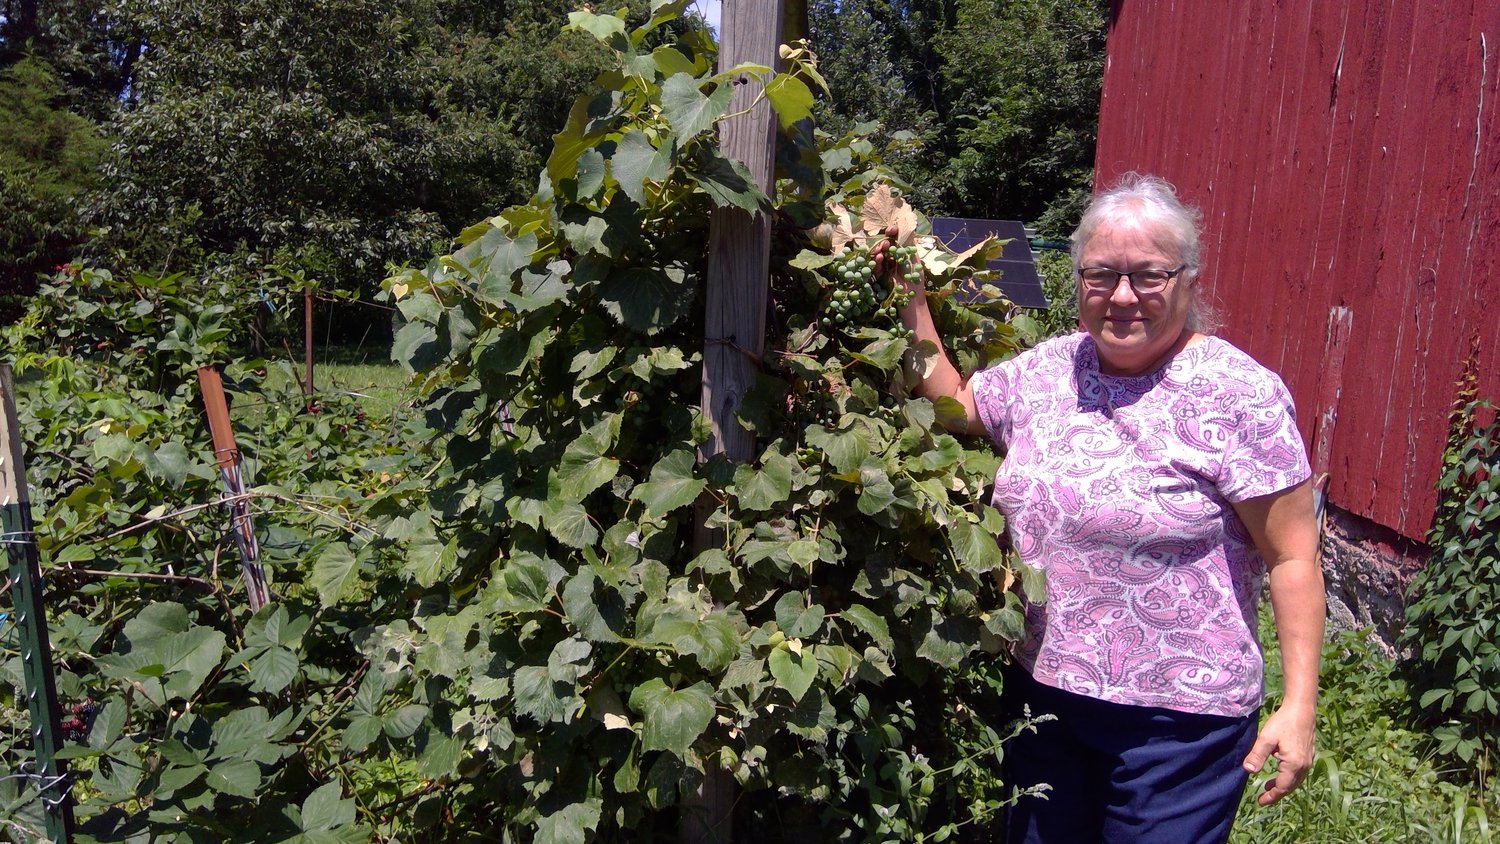 Dianne Combs poses near her soft fruit and berry crops at her West Wabash Avenue home.